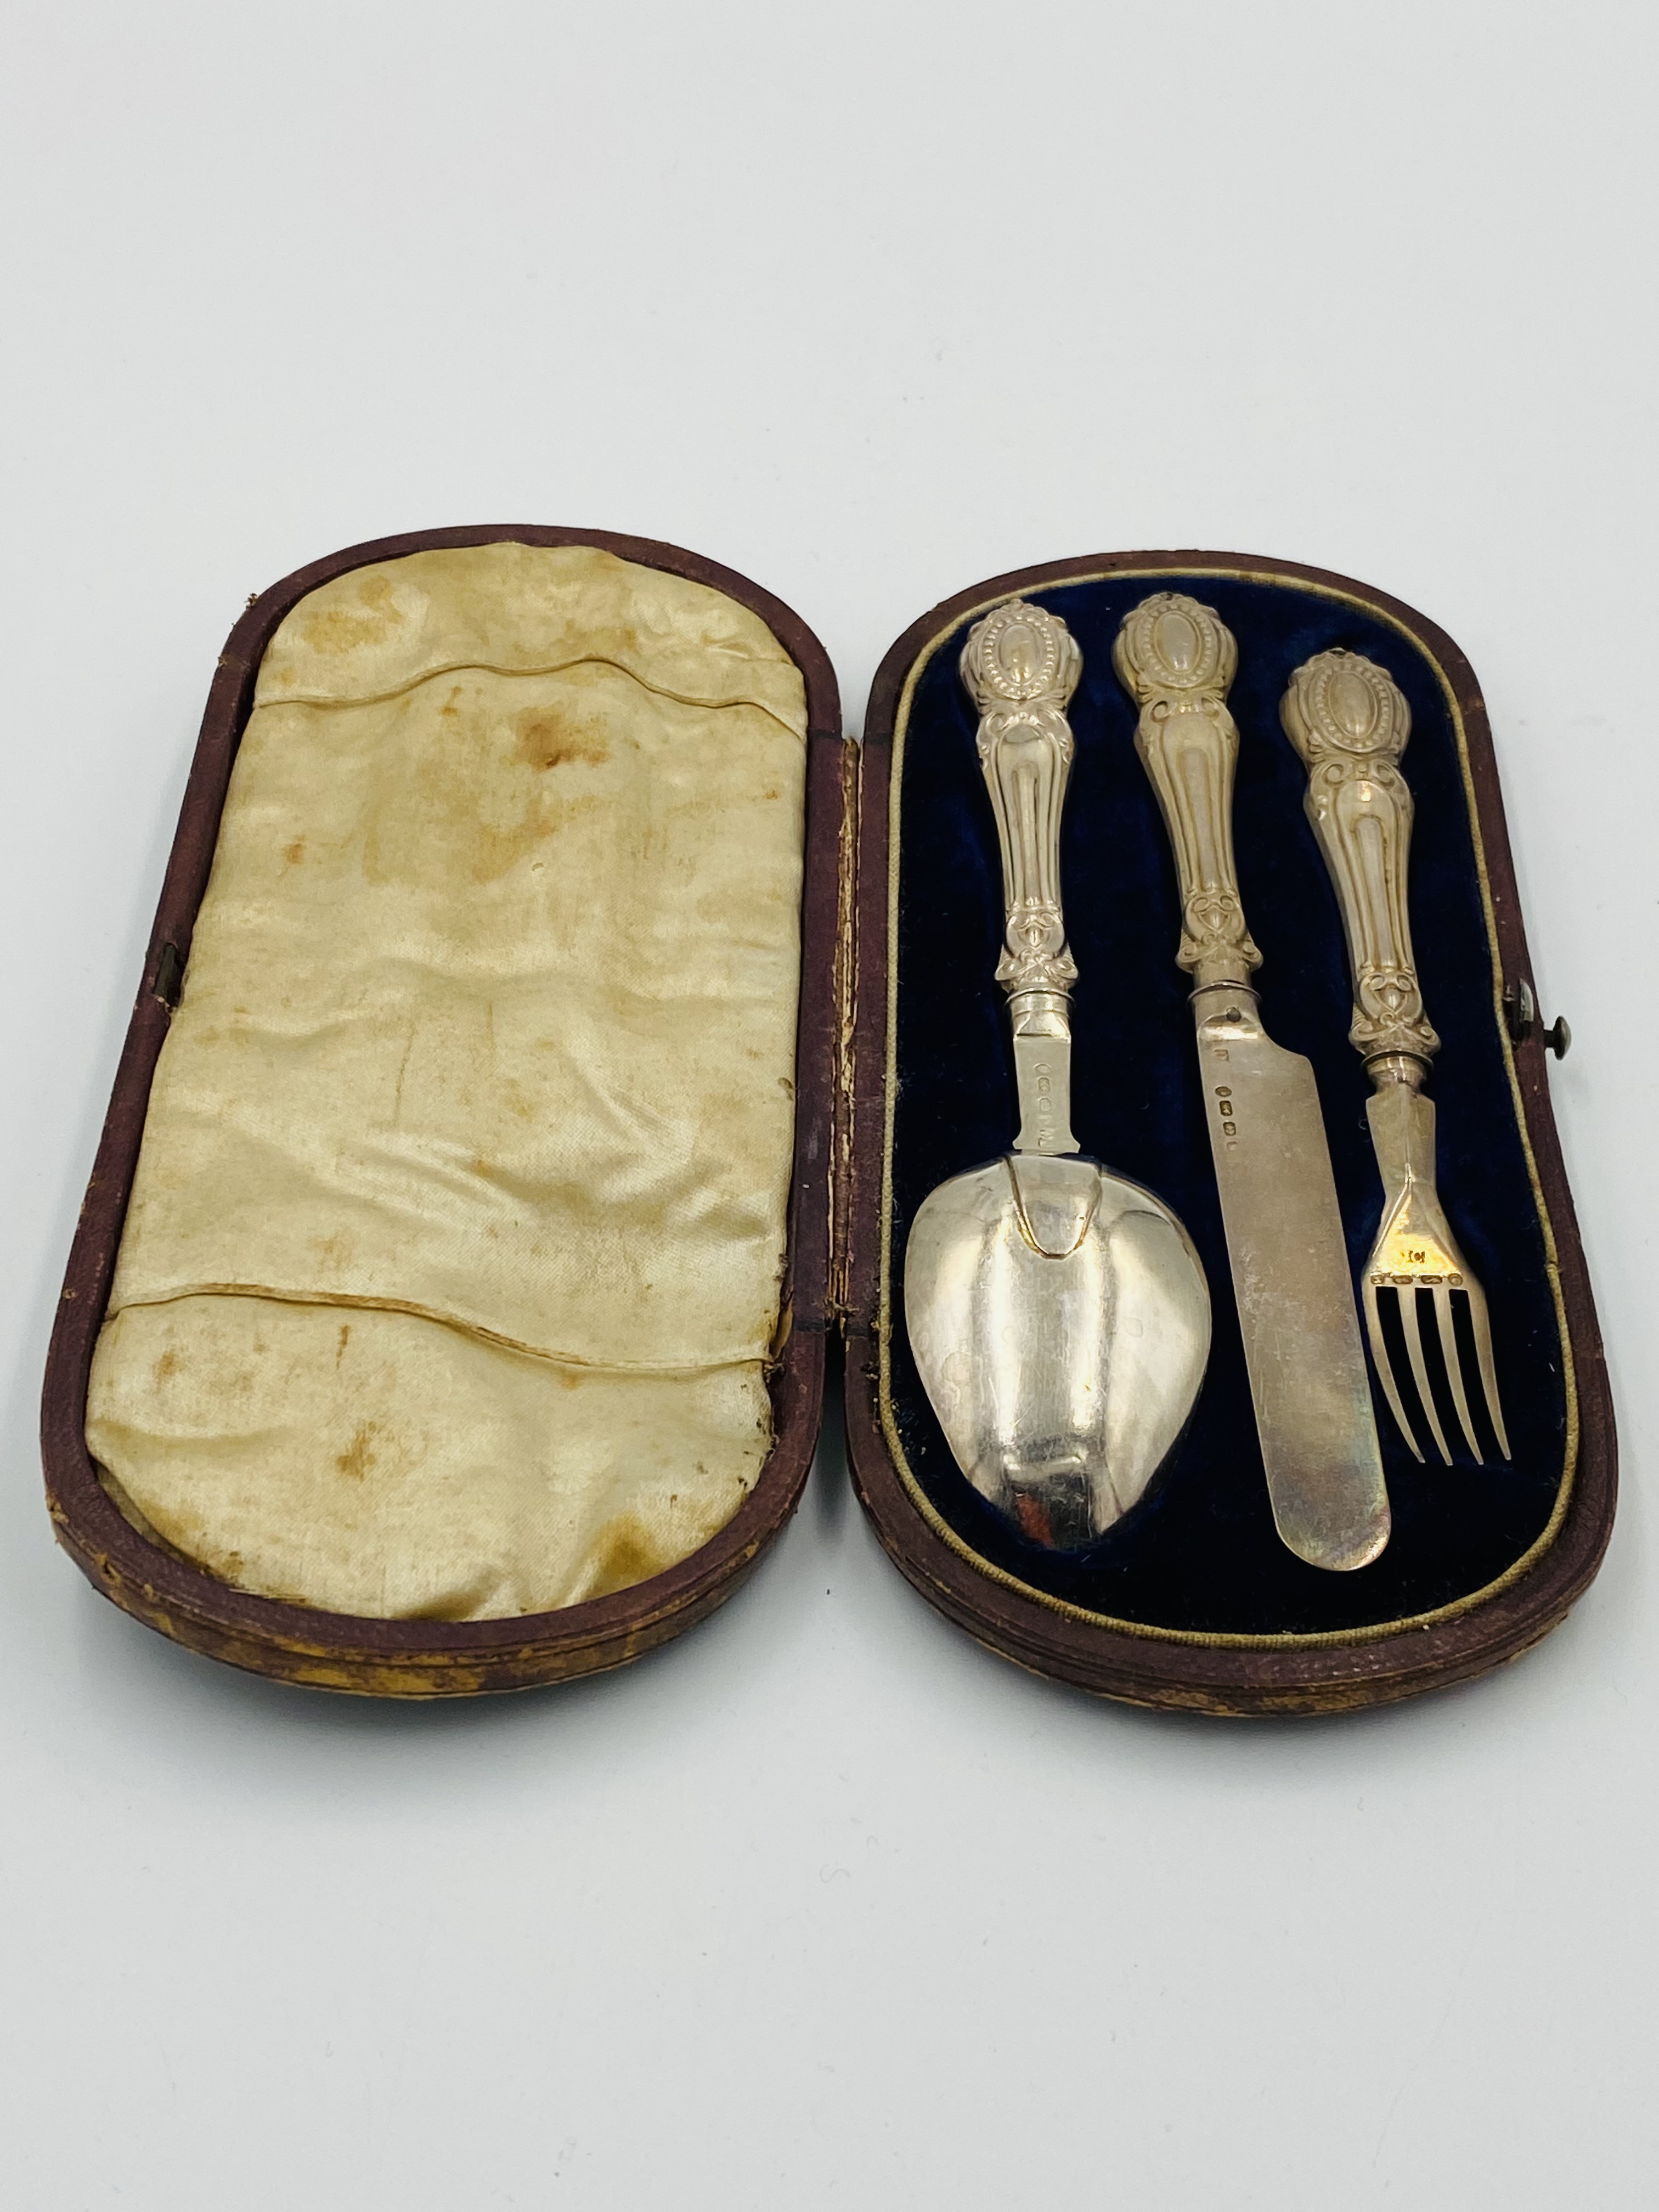 Victorian silver Christening set together with two silver dessert spoons - Image 4 of 5